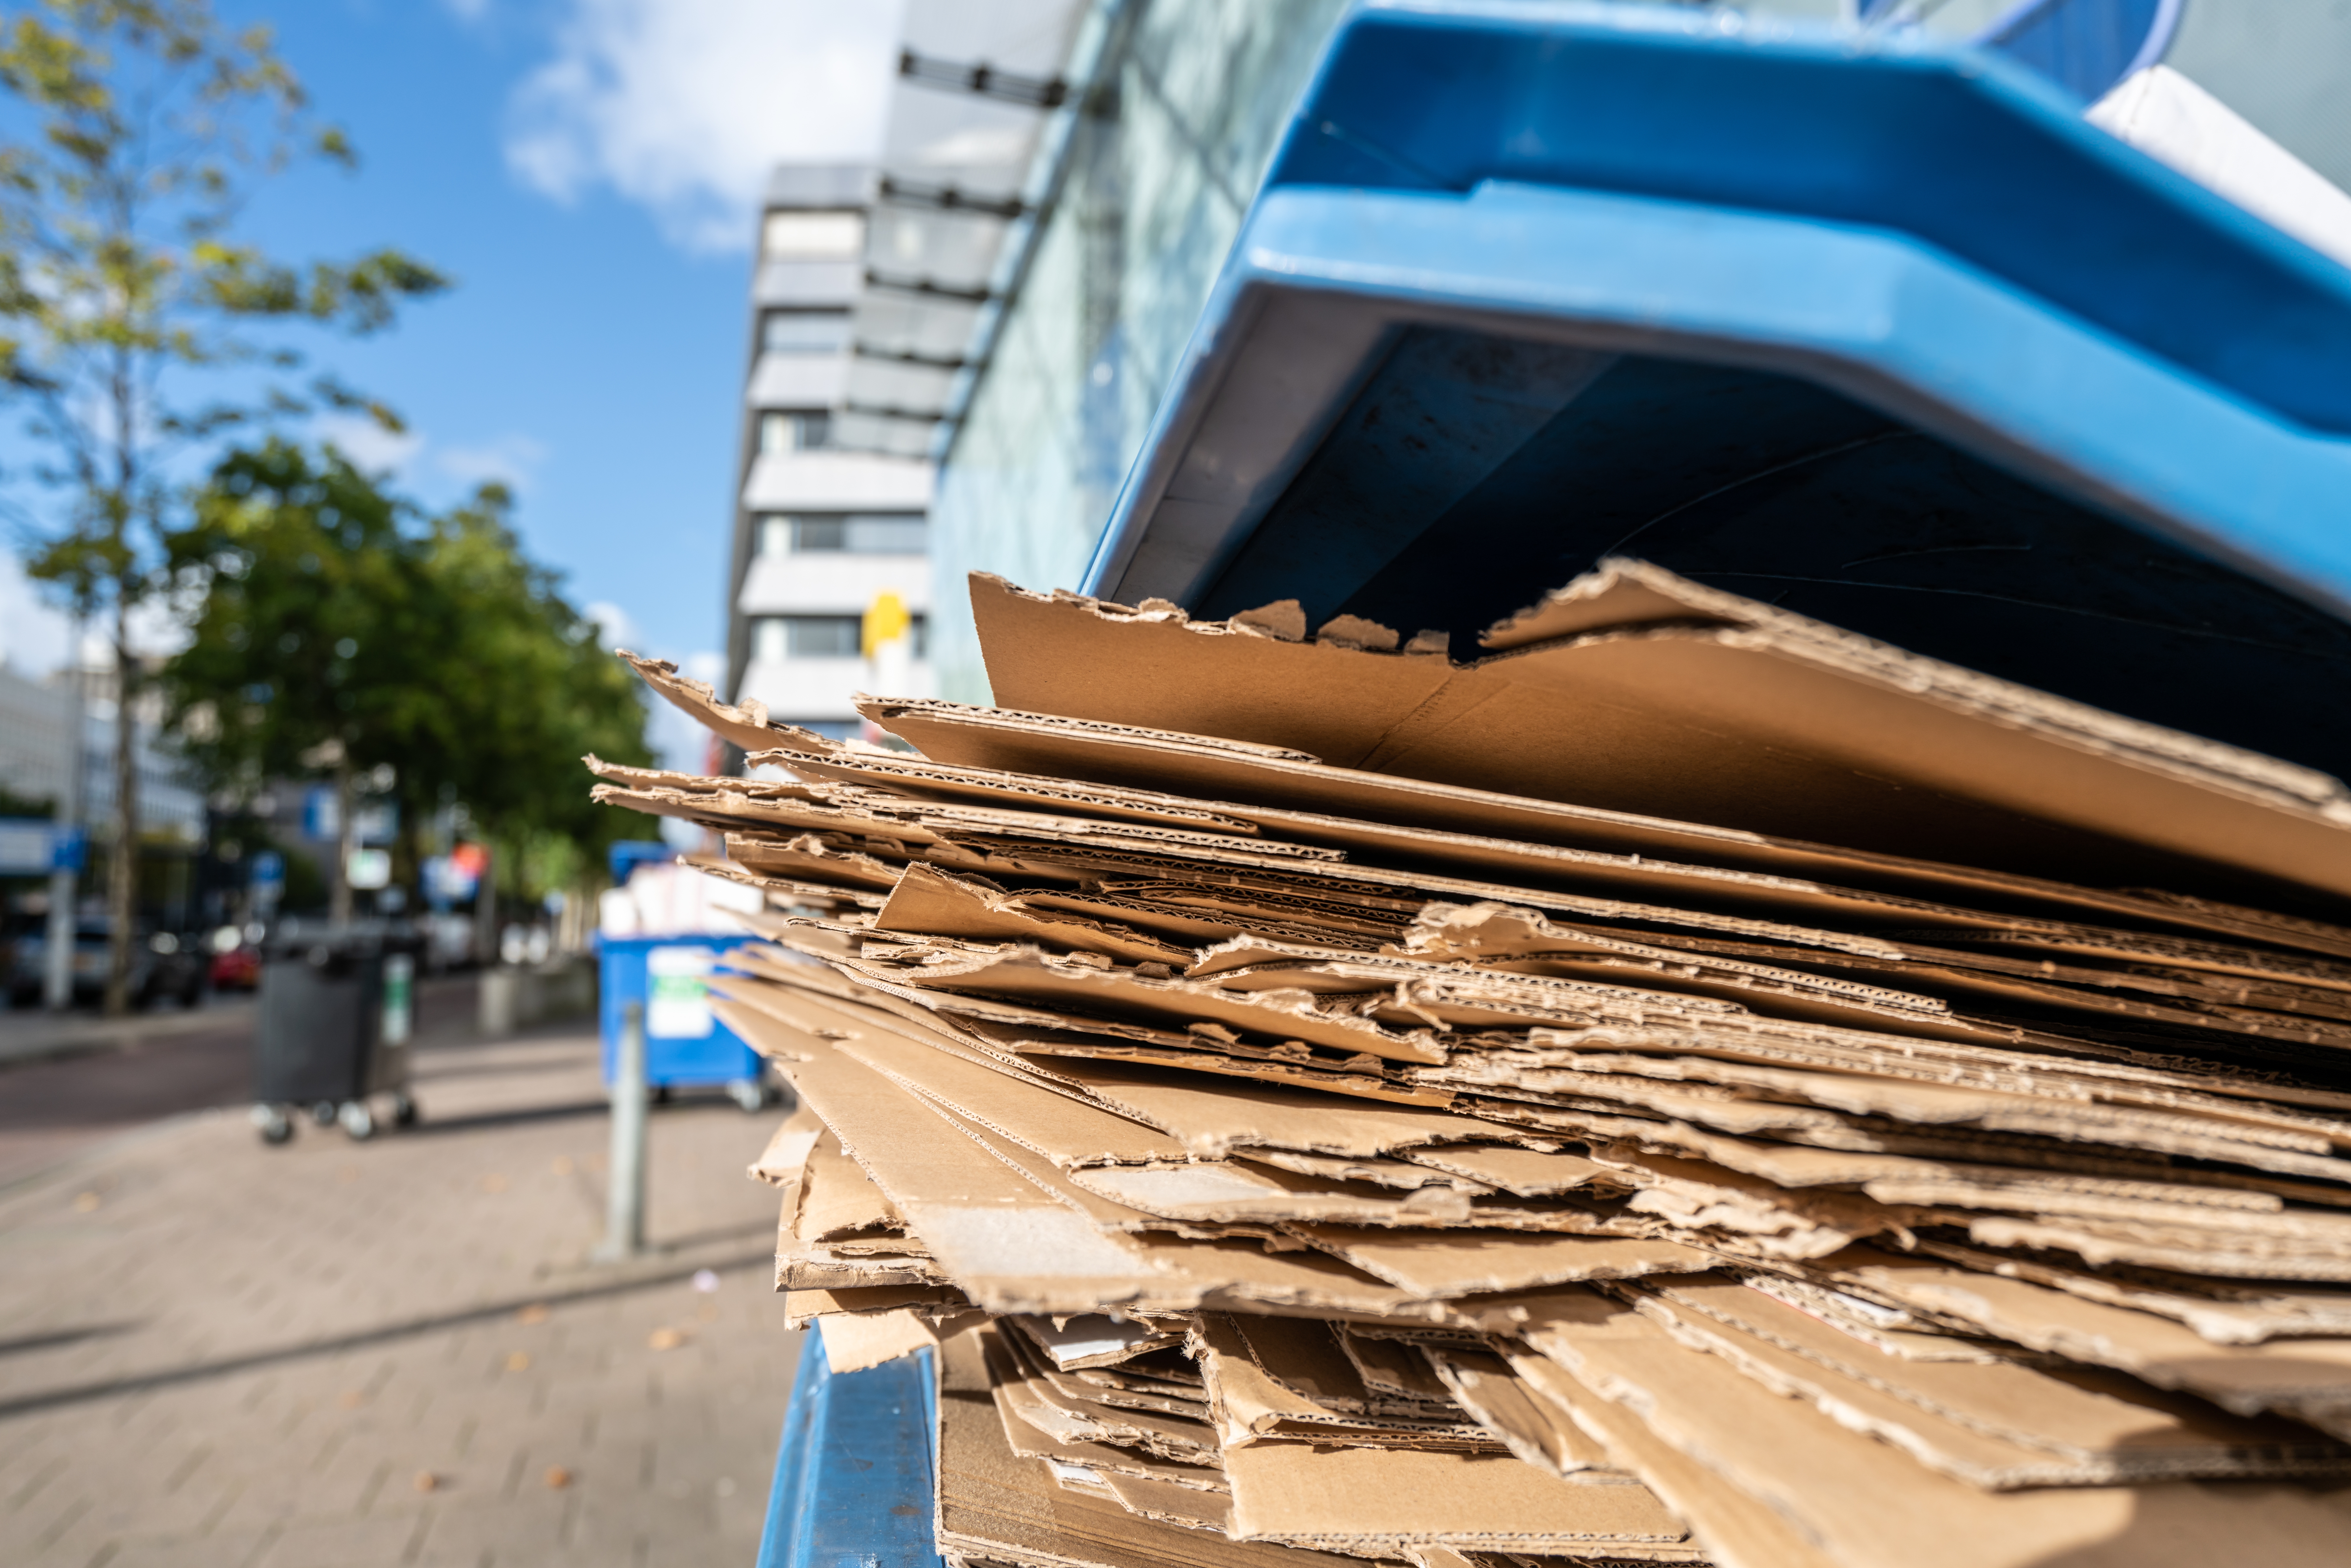 A pile of cardboard sticking out of an IoT monitored recycling bin.